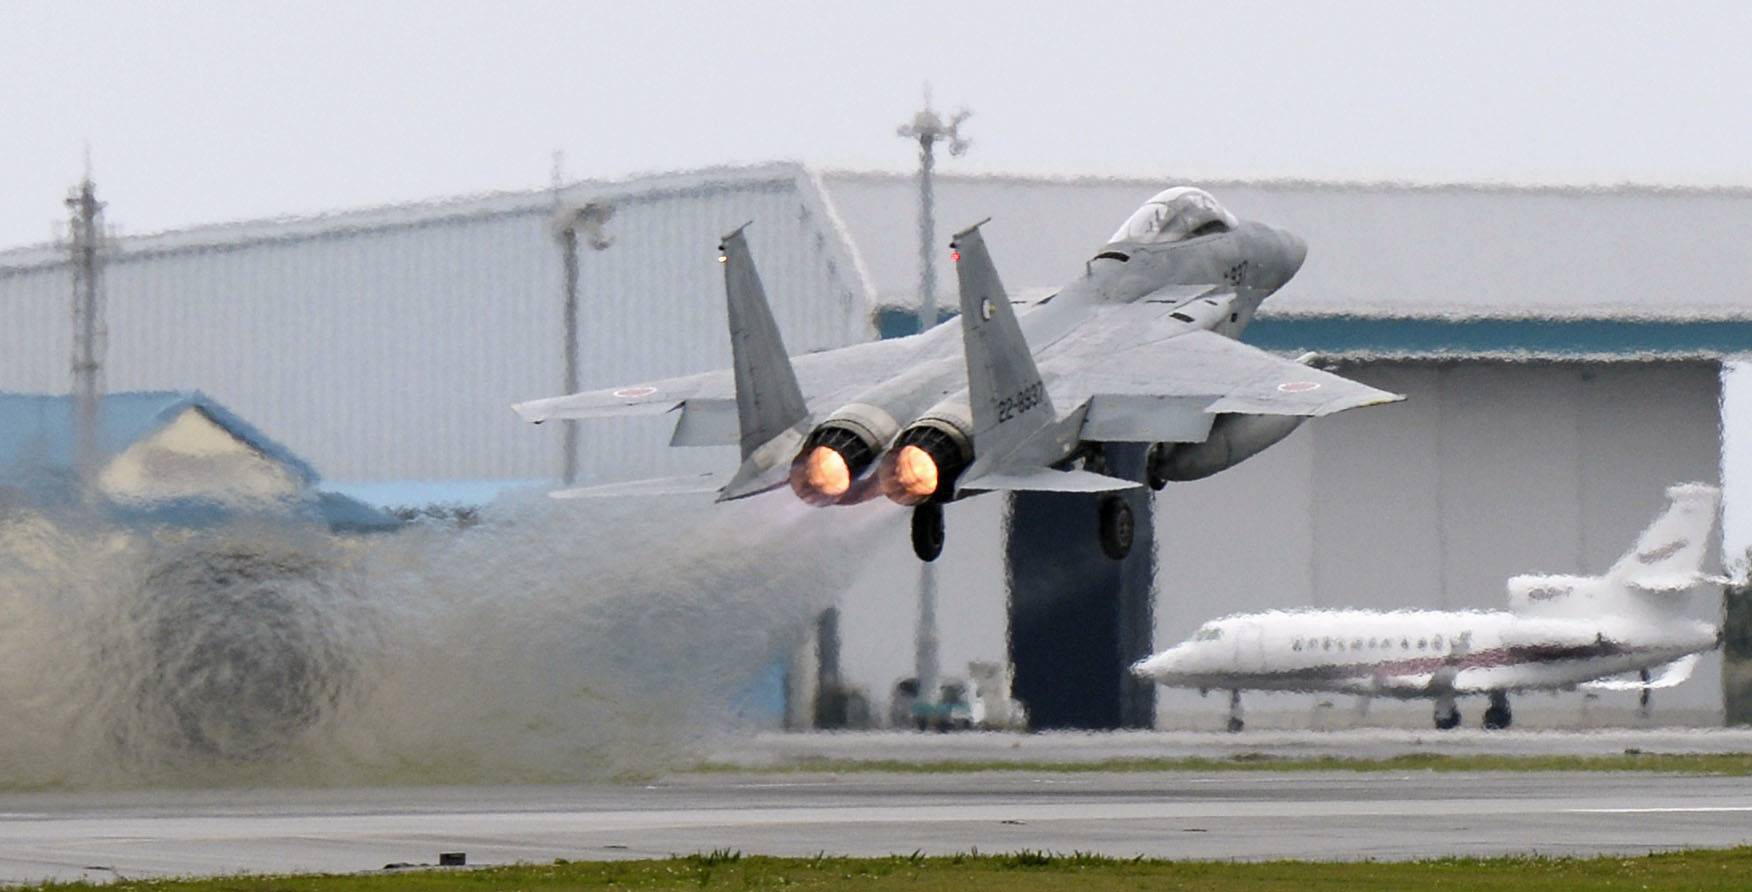 An F-15 fighter jet takes off from the Air Self-Defense Force base in Naha, Okinawa Prefecture, in April 2015. | KYODO